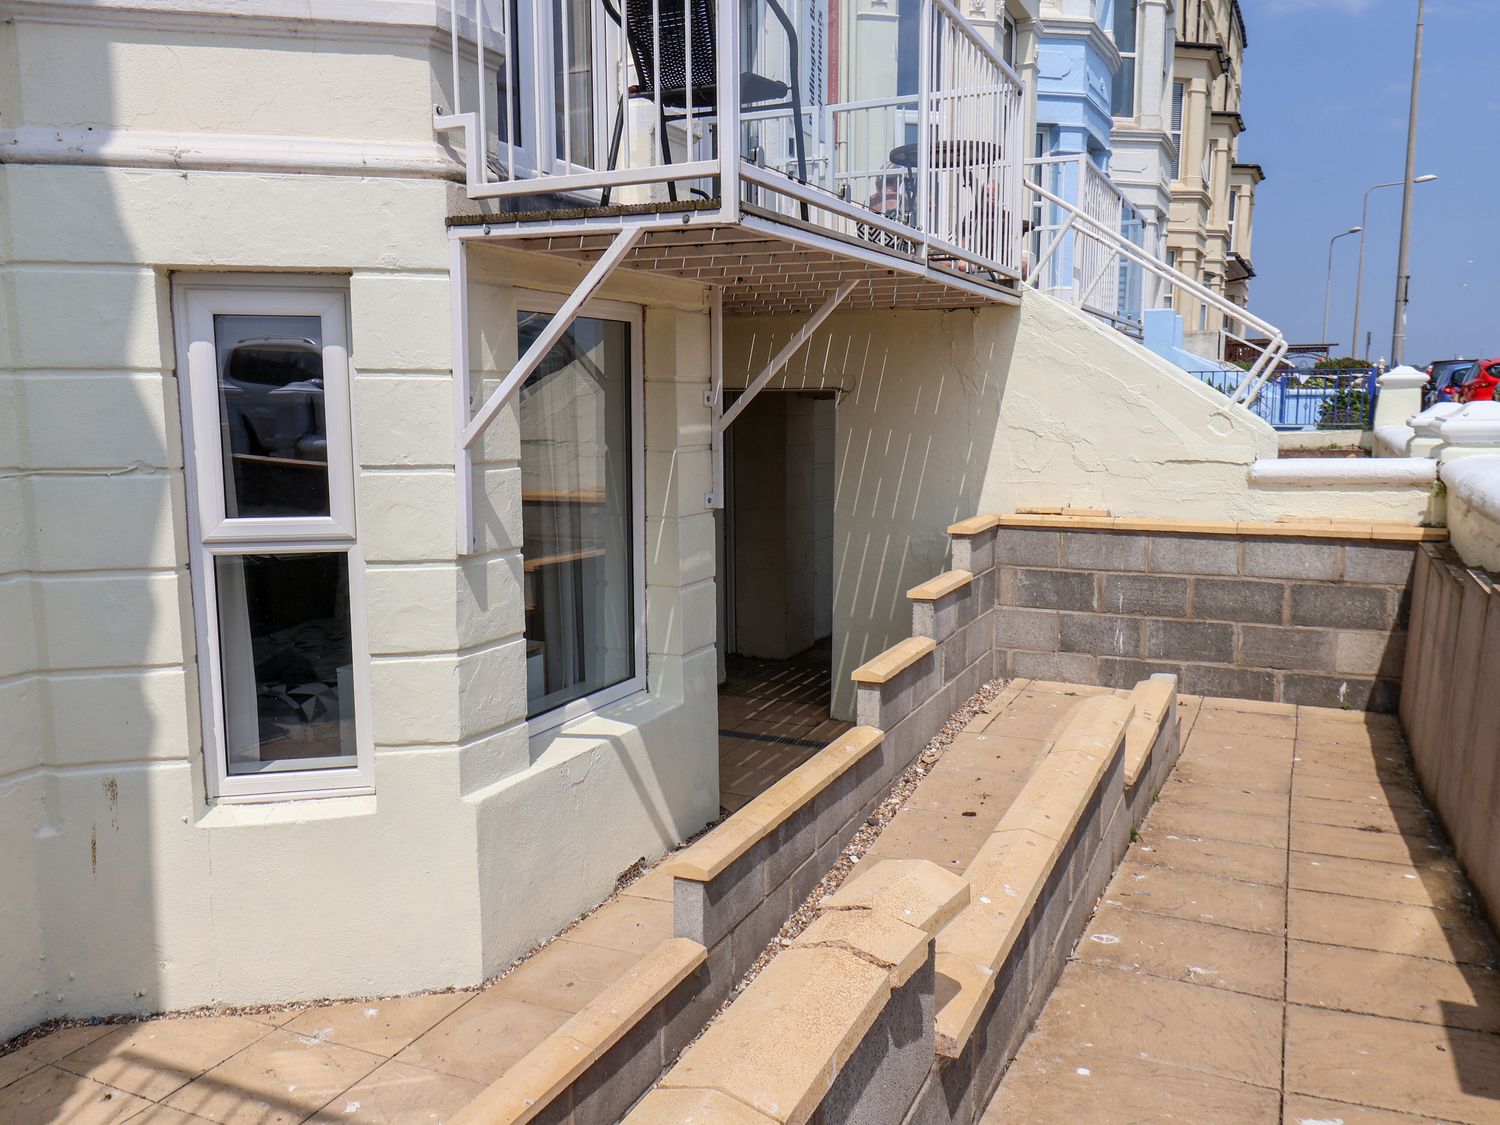 Apartment 1 @ Bridlington Bay - North Yorkshire (incl. Whitby) - 1136961 - photo 1